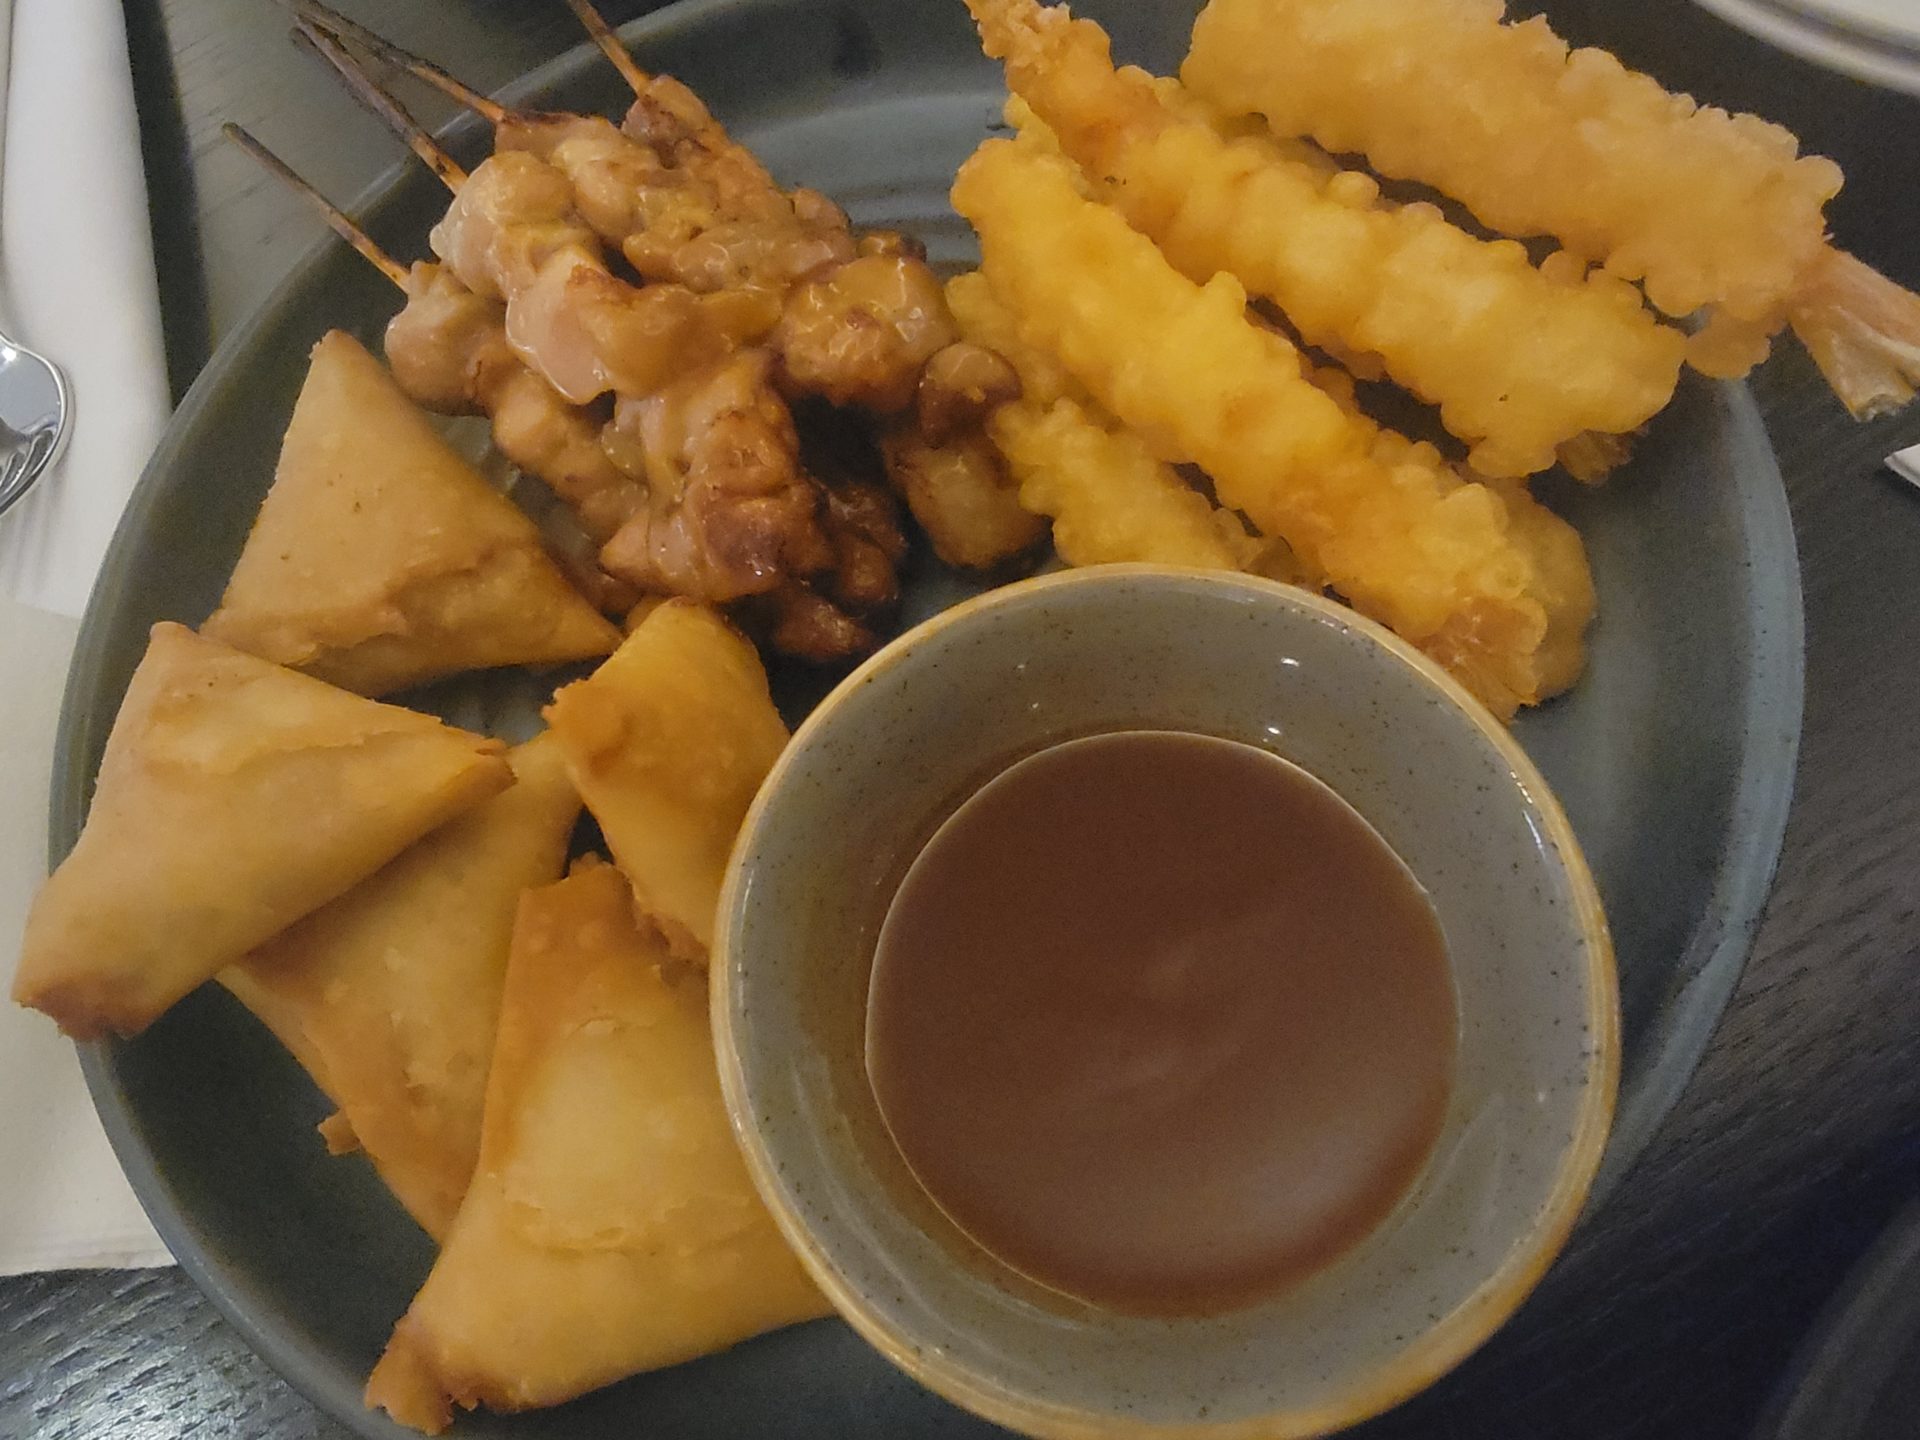 a plate of fried food with sauce